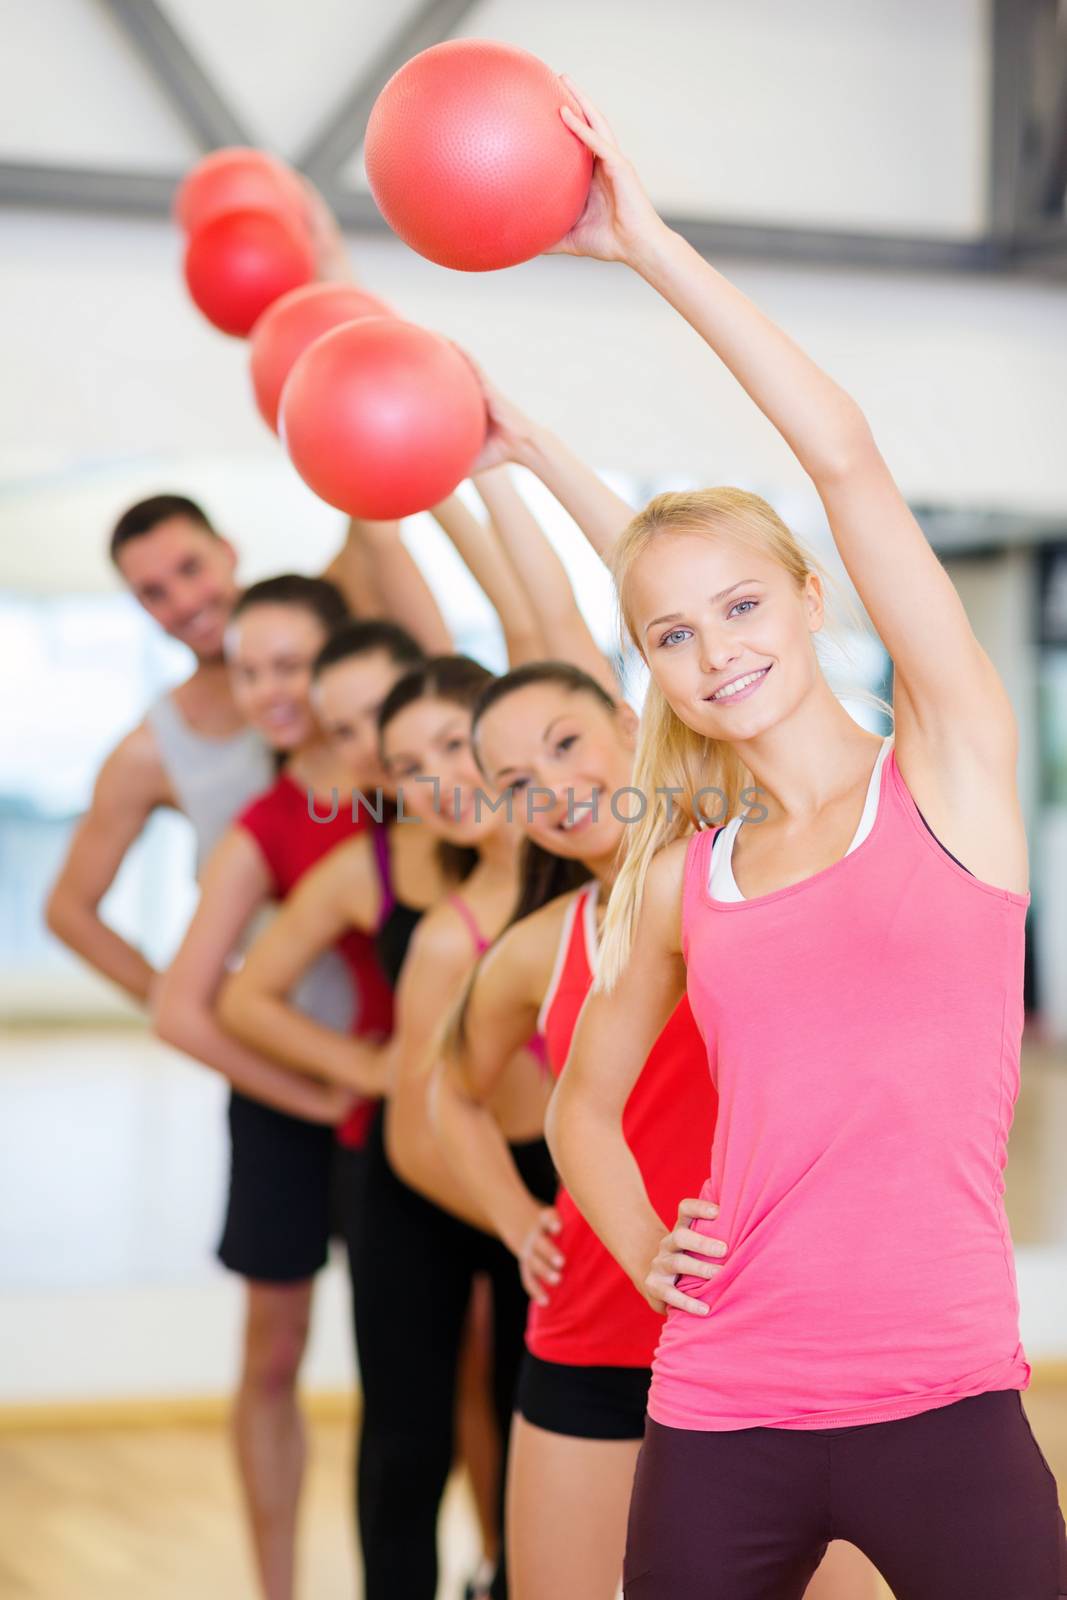 group of smiling people working out with ball by dolgachov